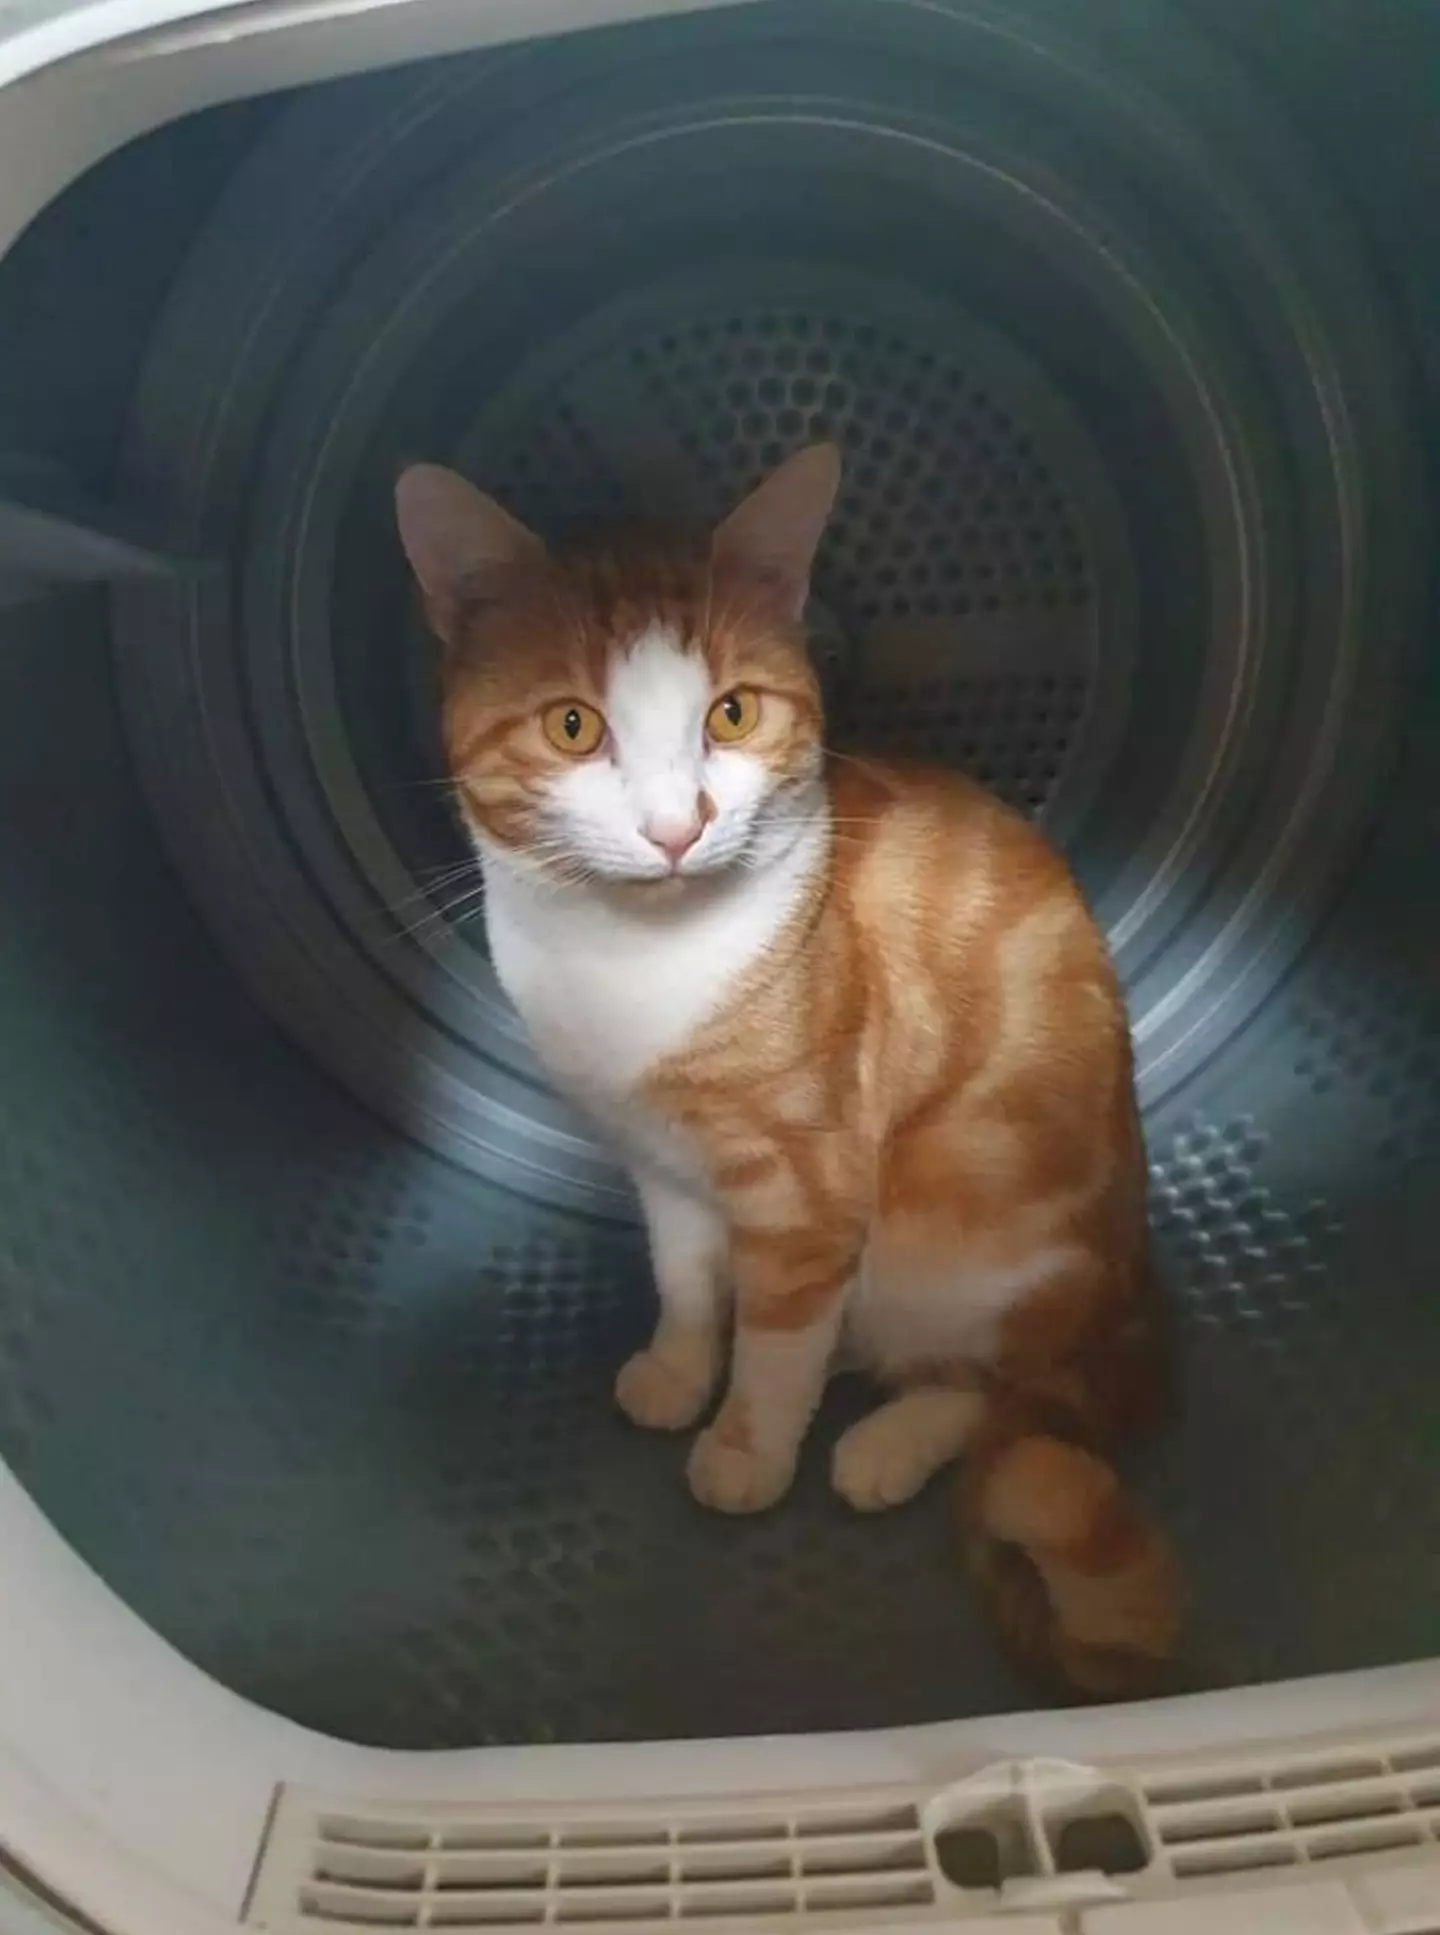 Her other cat Huxley was known to sometimes sit in the dryer.